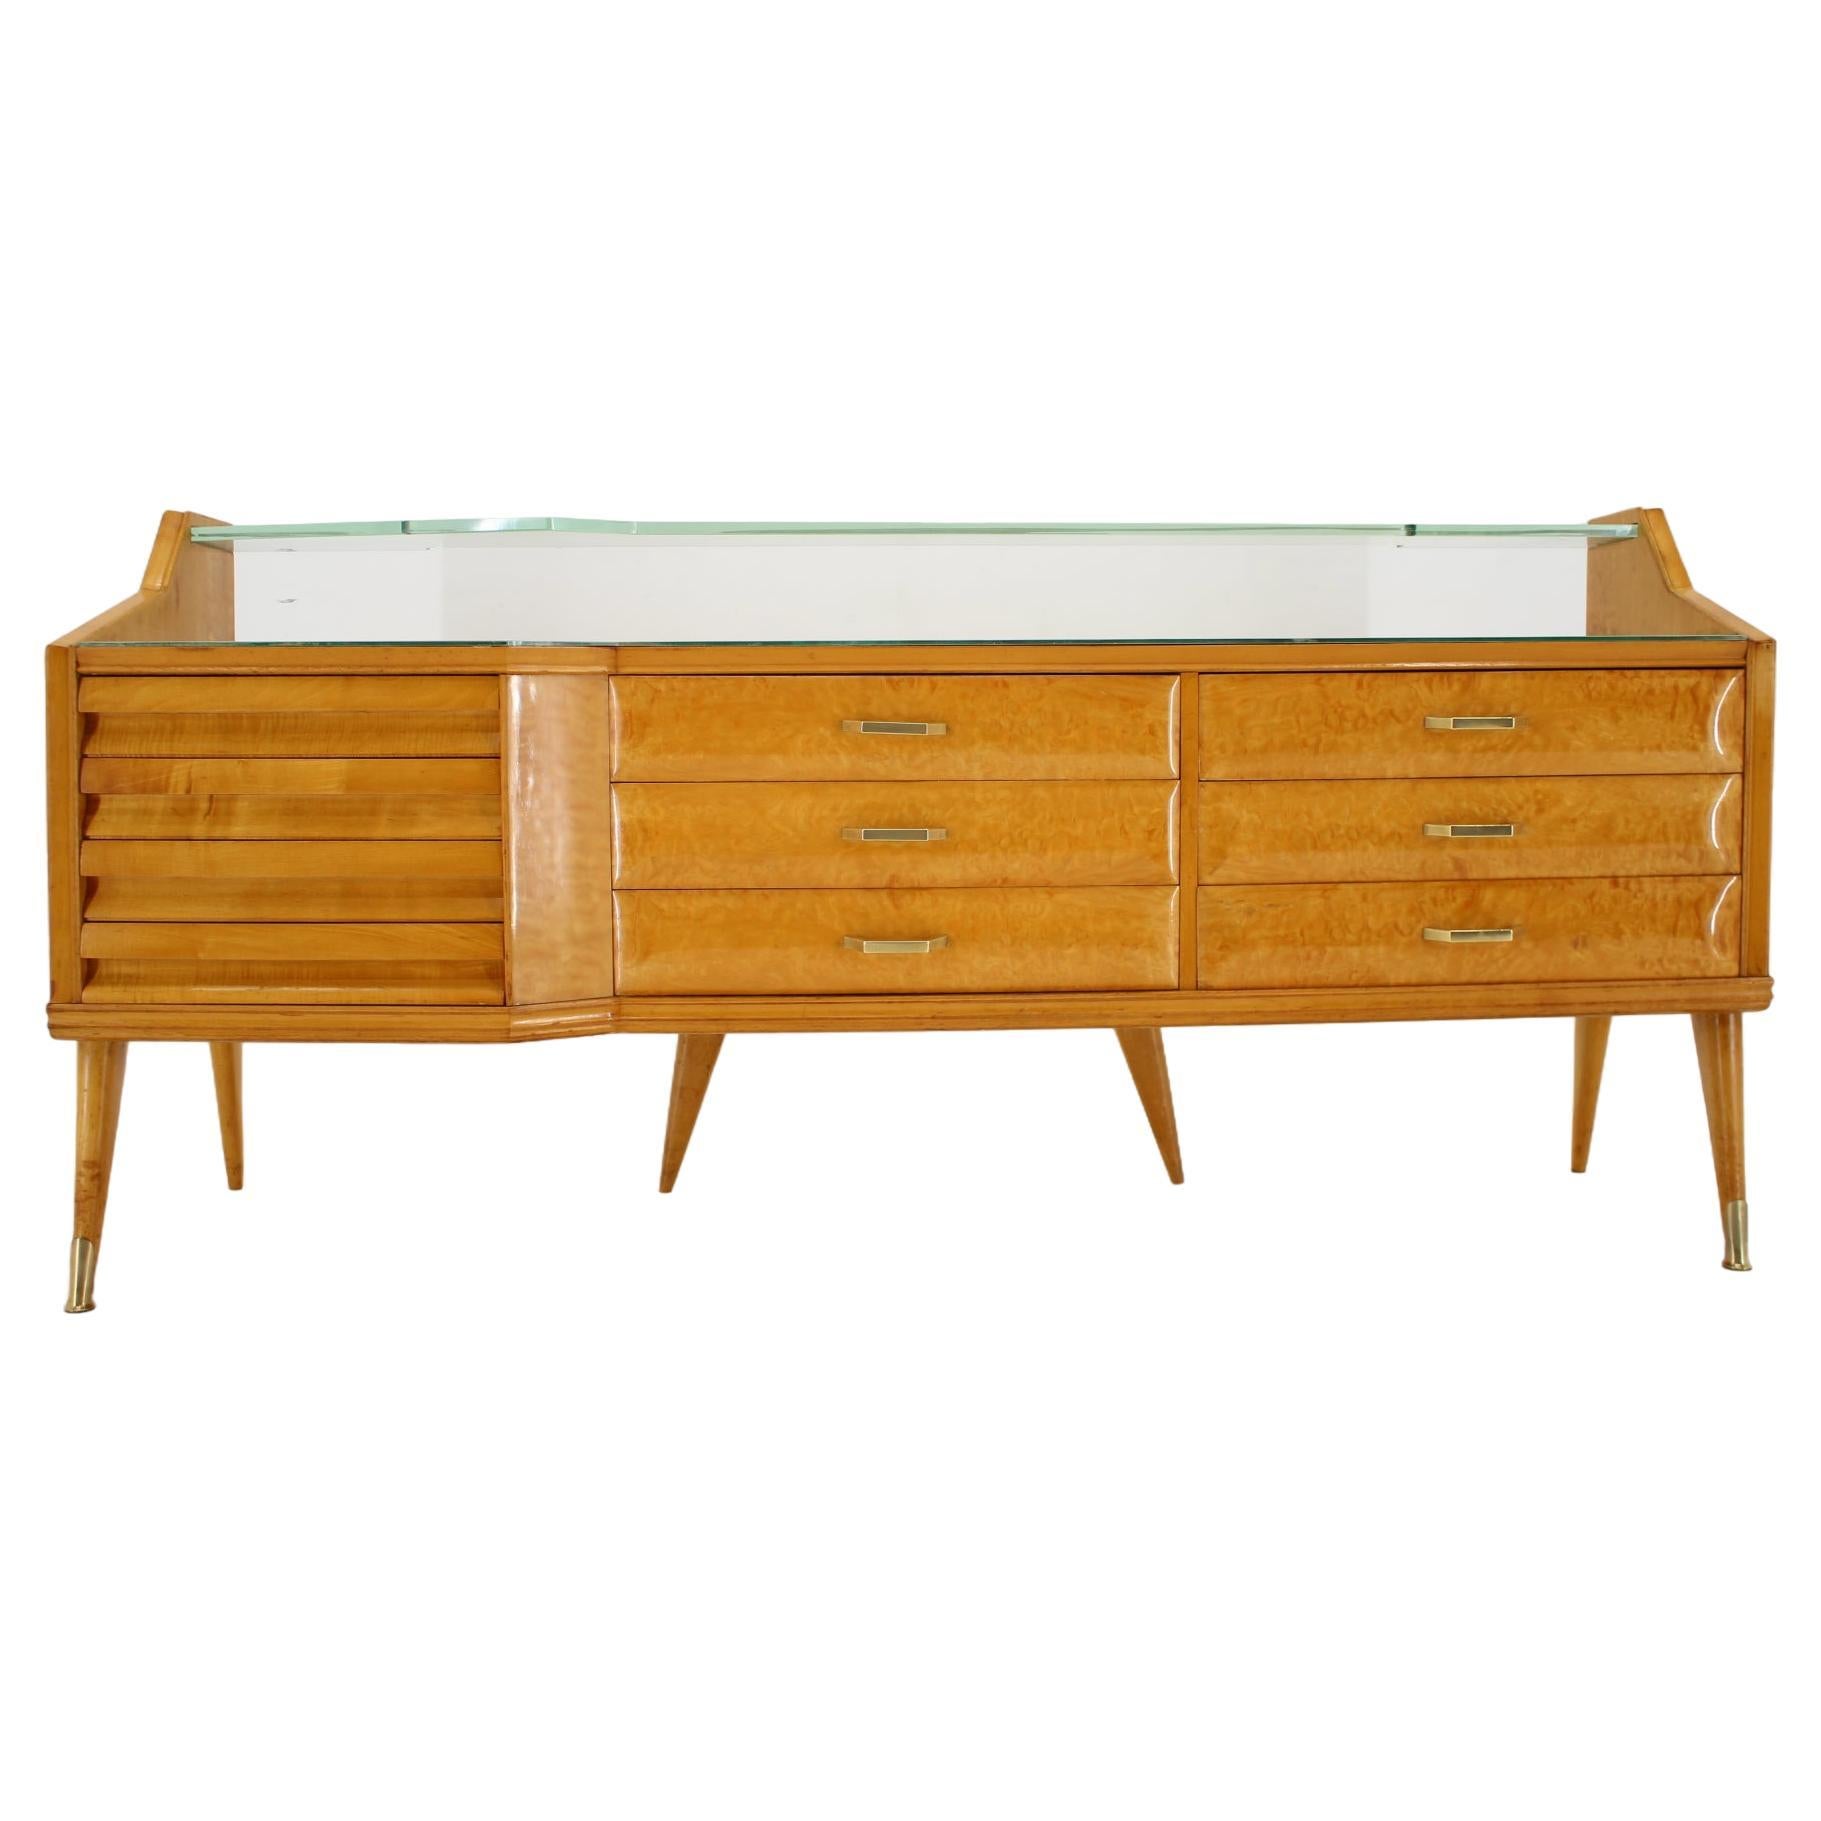 1960s Italian Sideboard/Chest of Drawers in High Gloss Finish with Glass Top and For Sale